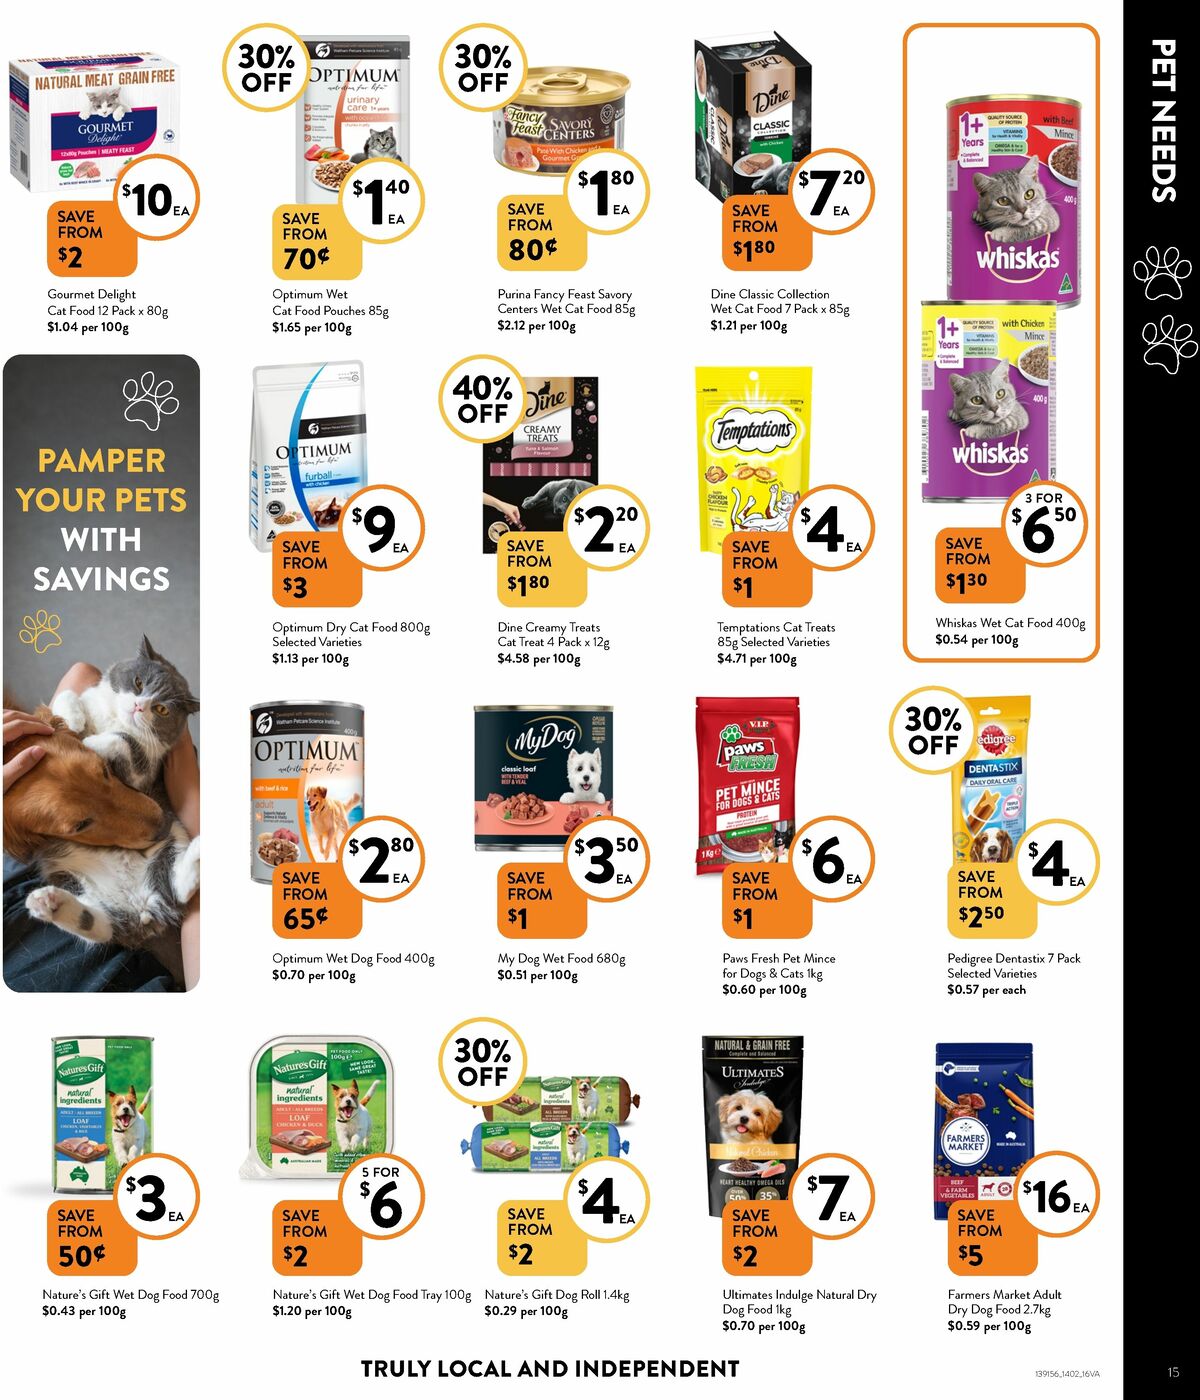 FoodWorks Supermarket Catalogues from 14 February